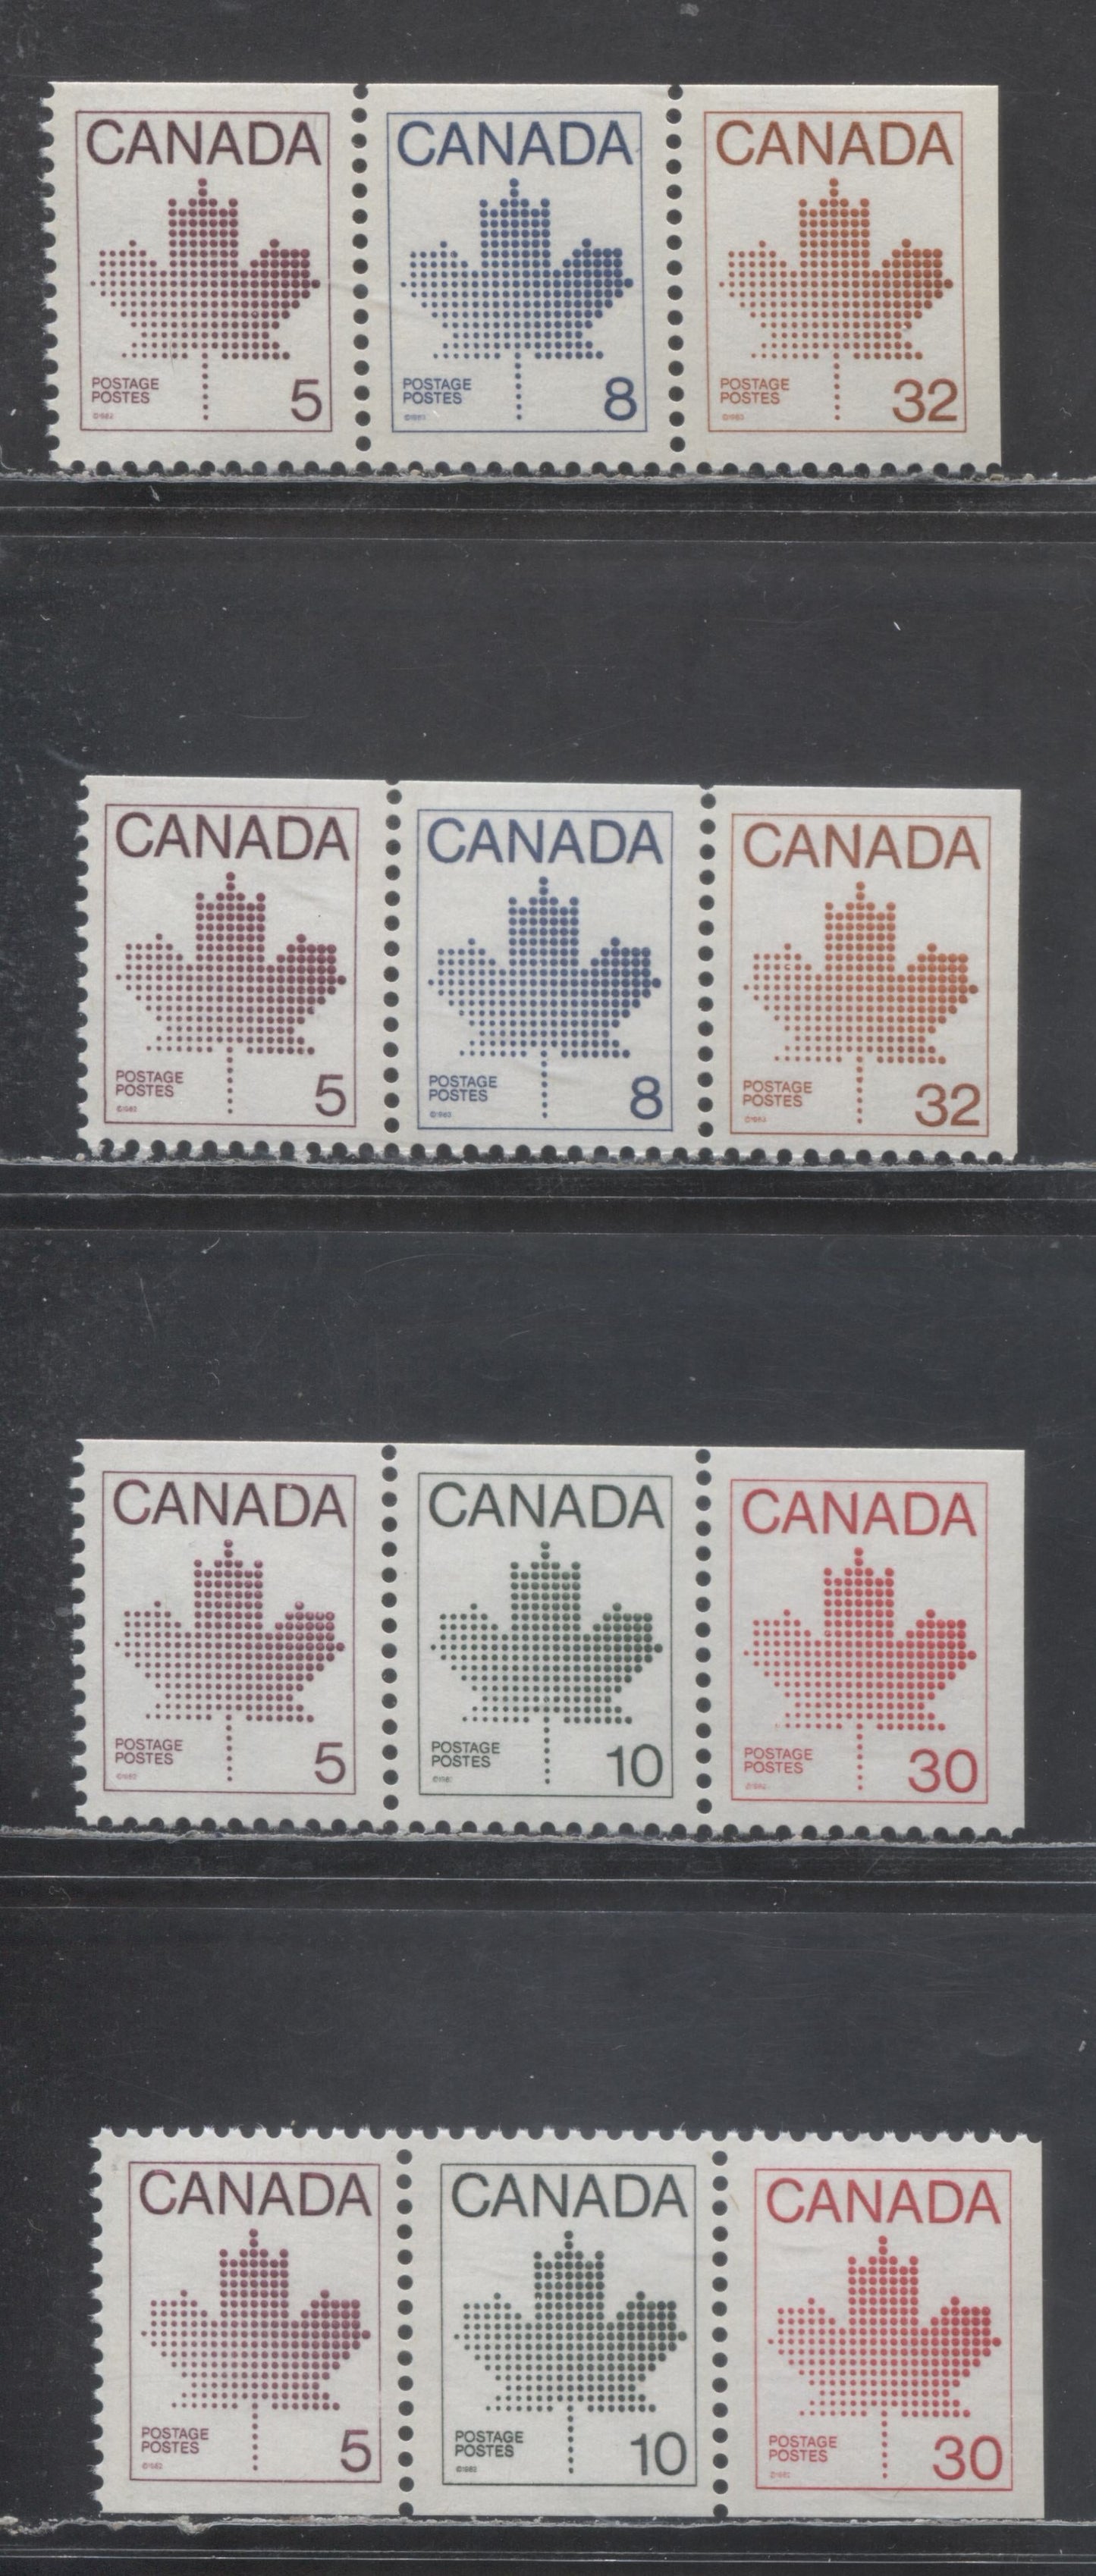 Canada #940, 943-946 5c-32c Purple-Brown Maple Leaf, 1982-1987 Booklet Issue, 4 VFNH Se-tenant Booklet Strips Of 3 On LF & LF-fl Paper